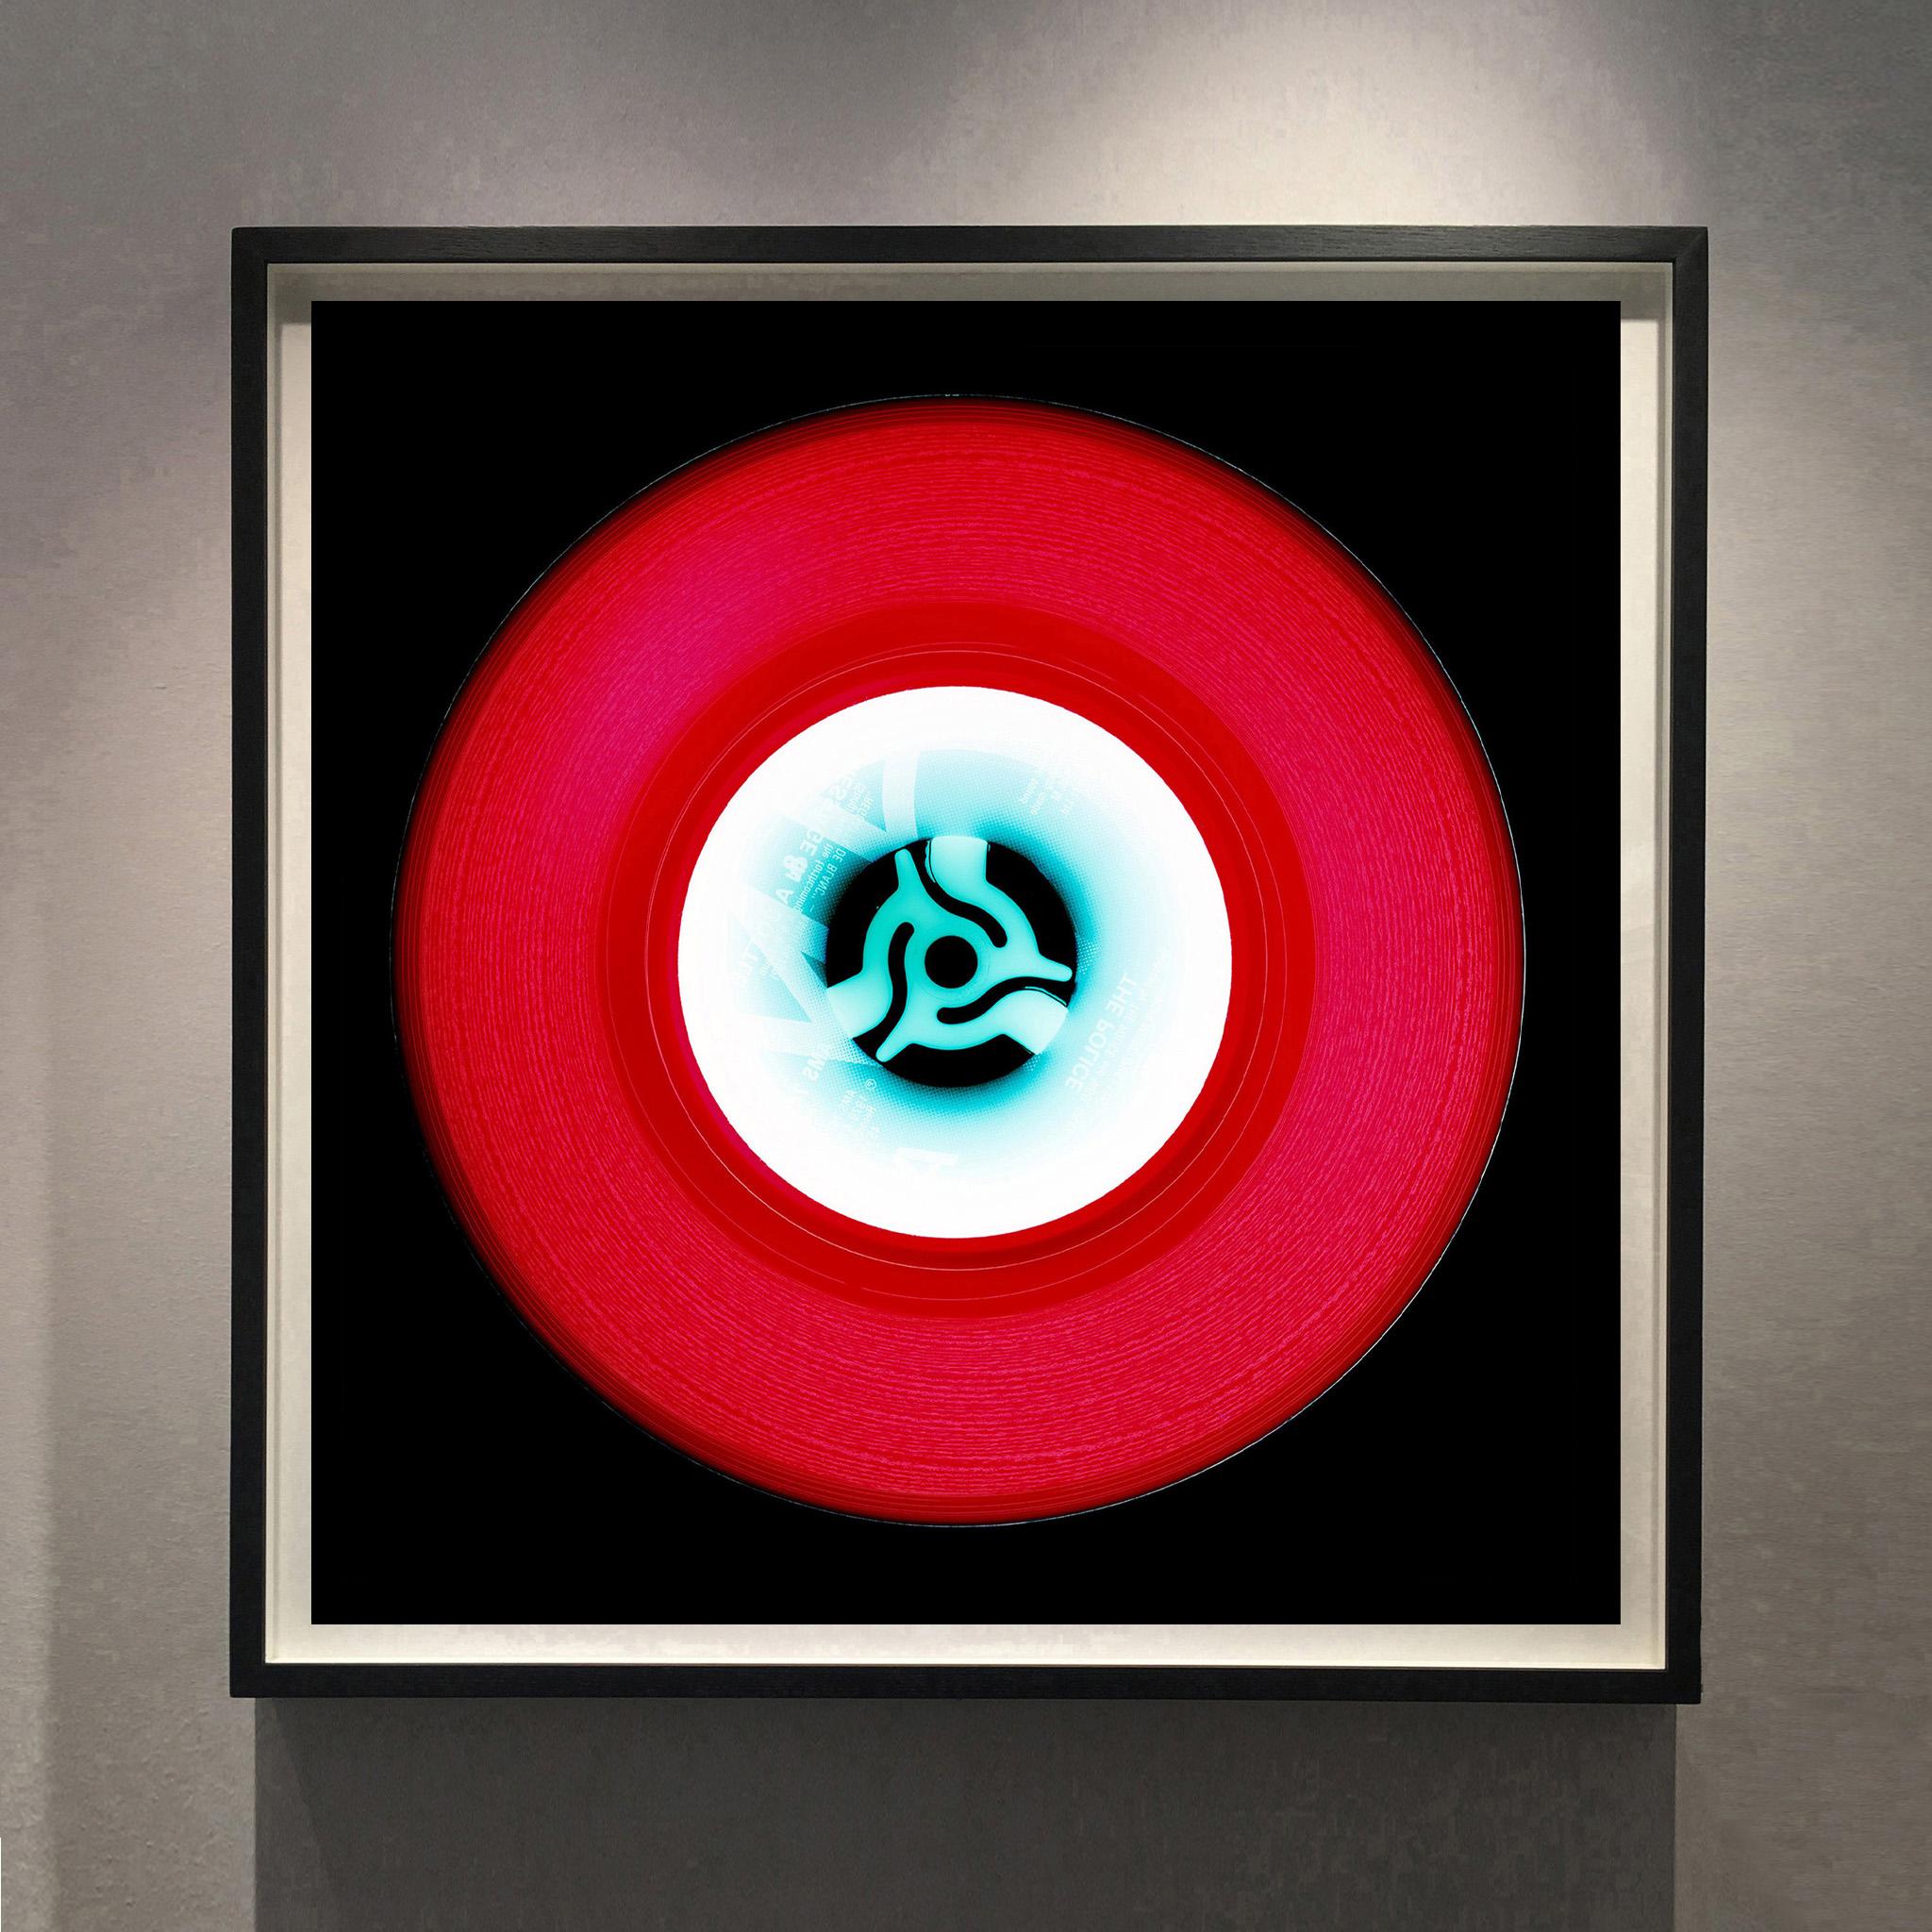 Vinyl Collection, A (Cherry Red) - Conceptual Pop Art Color Photography - Print by Heidler & Heeps